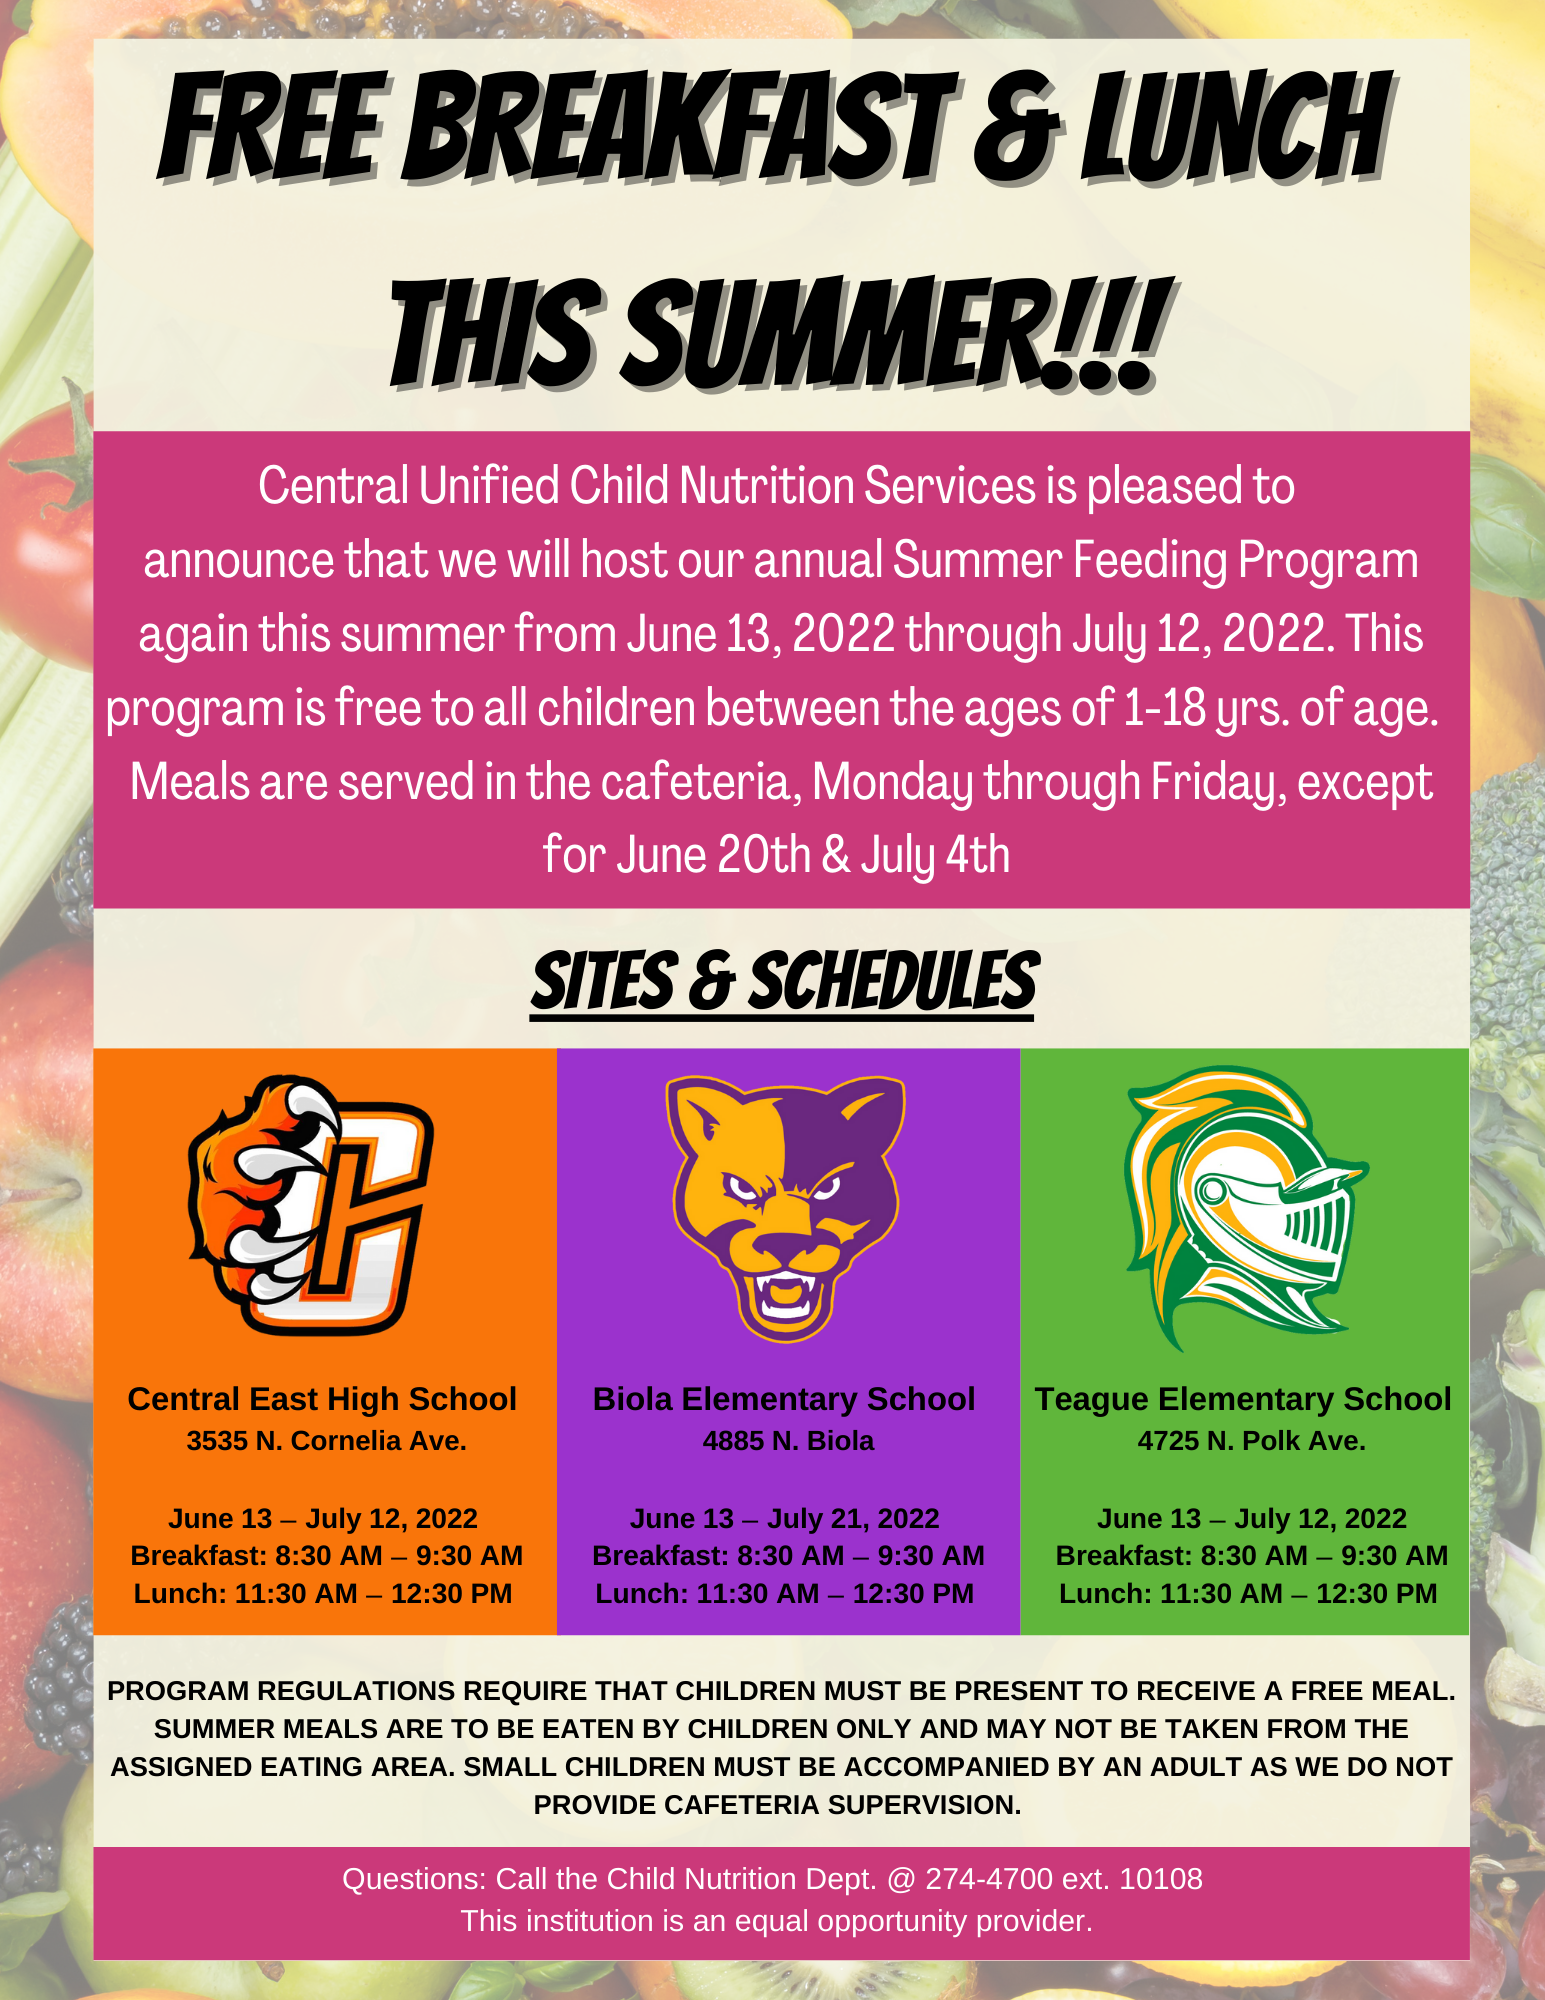 Free summer breakfast and lunch flier. Breakfast and lunch schedules and locations   Central East High School                    Breakfast: 8:30 AM - 9:30 AM              Lunch: 11:30 AM - 12:30 PM                 Biola-Pershing Elementary School Breakfast: 8:30 AM - 9:30 AM Lunch: 11:30 AM - 12:30 PM  Teague Elementary School  Breakfast: 8:30 AM - 9:30 AM  Lunch: 11:30 AM - 12:30 PM 